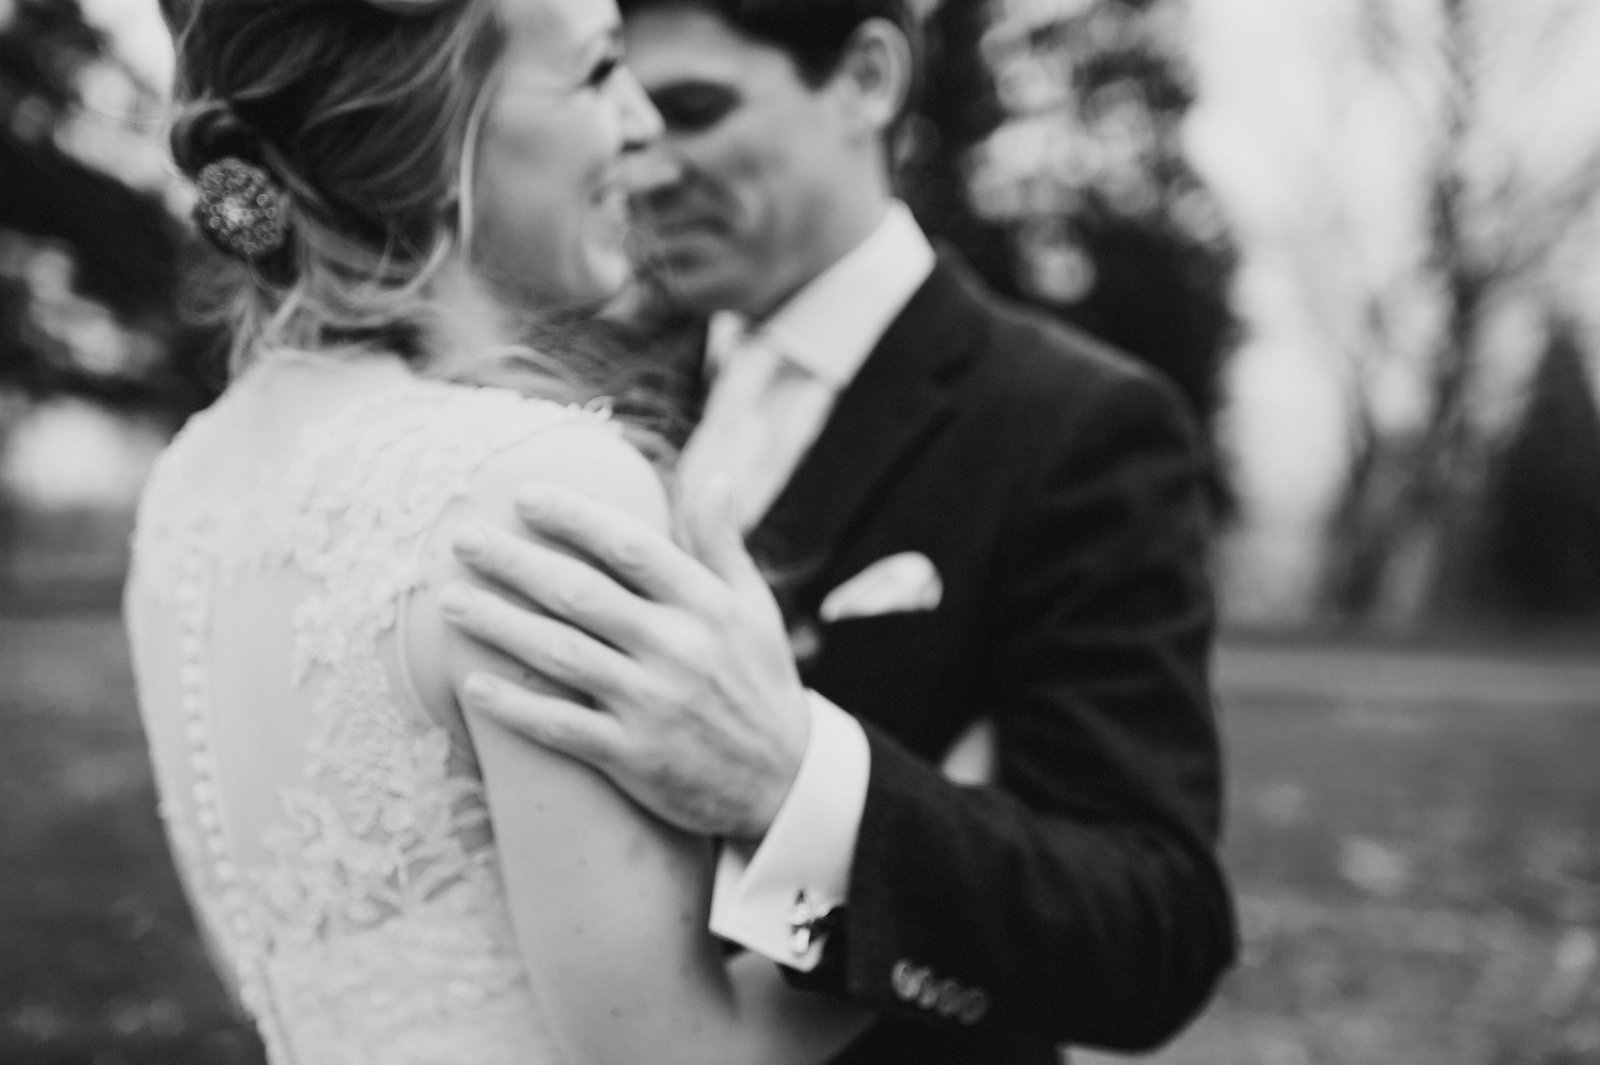 katie and simon's winter wedding at queenston heights